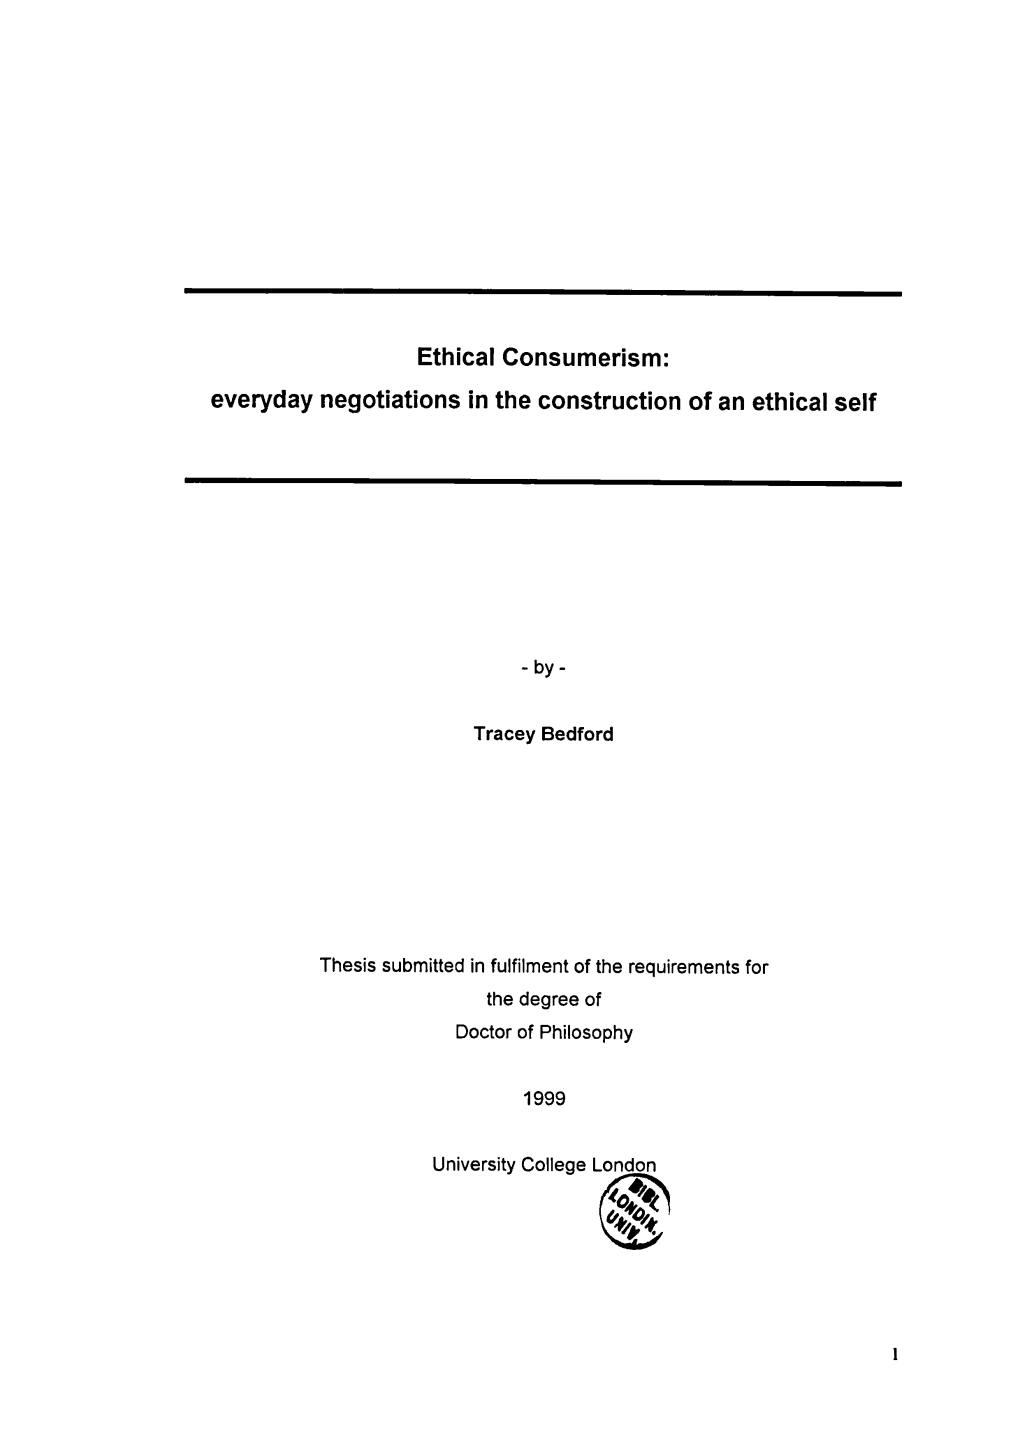 Ethical Consumerism: Everyday Negotiations in the Construction of an Ethical Self